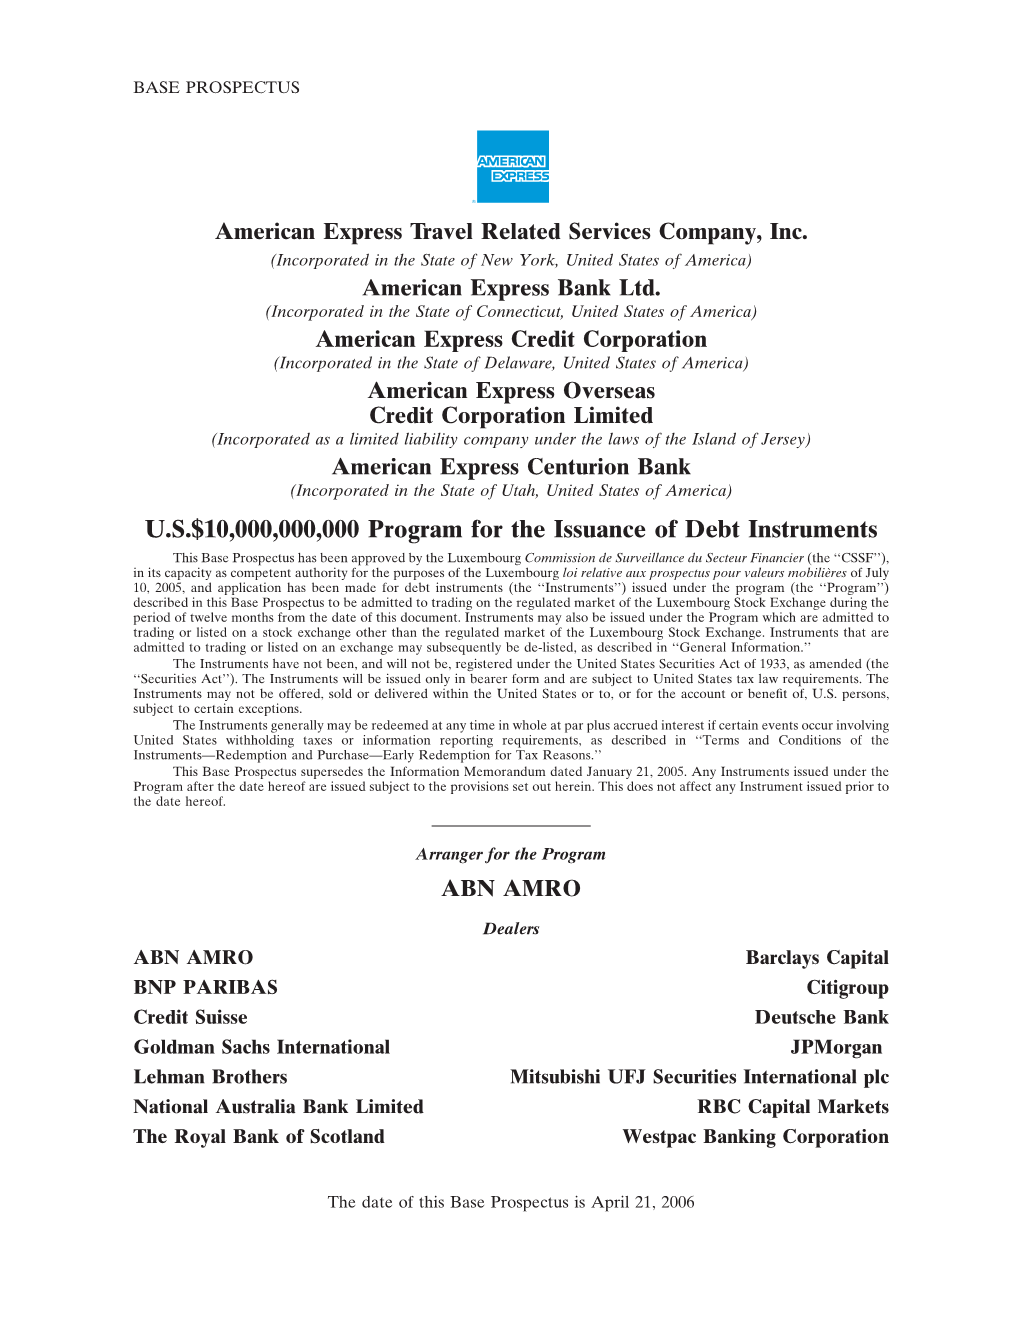 U.S.$10,000,000,000 Program for the Issuance of Debt Instruments